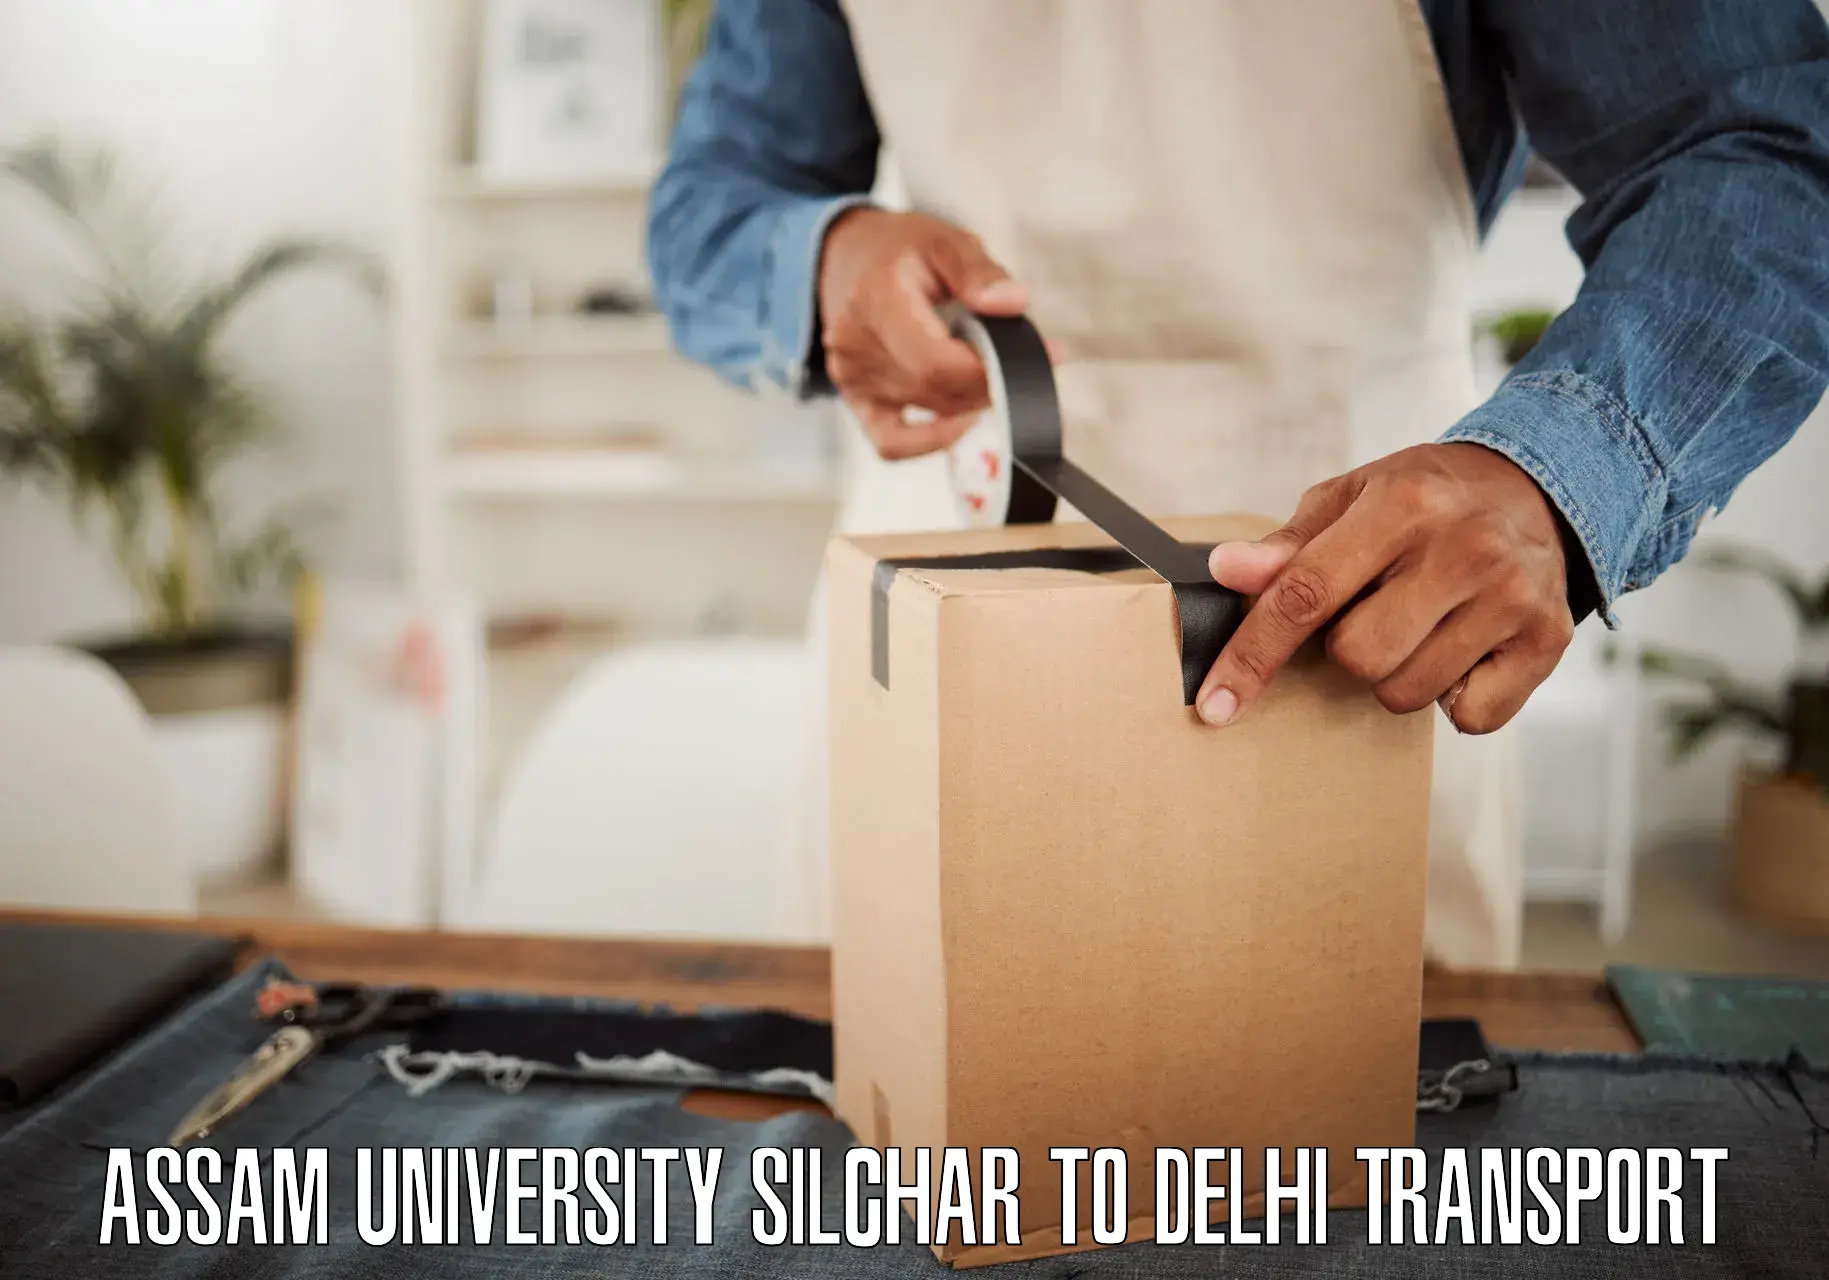 Truck transport companies in India Assam University Silchar to Jhilmil